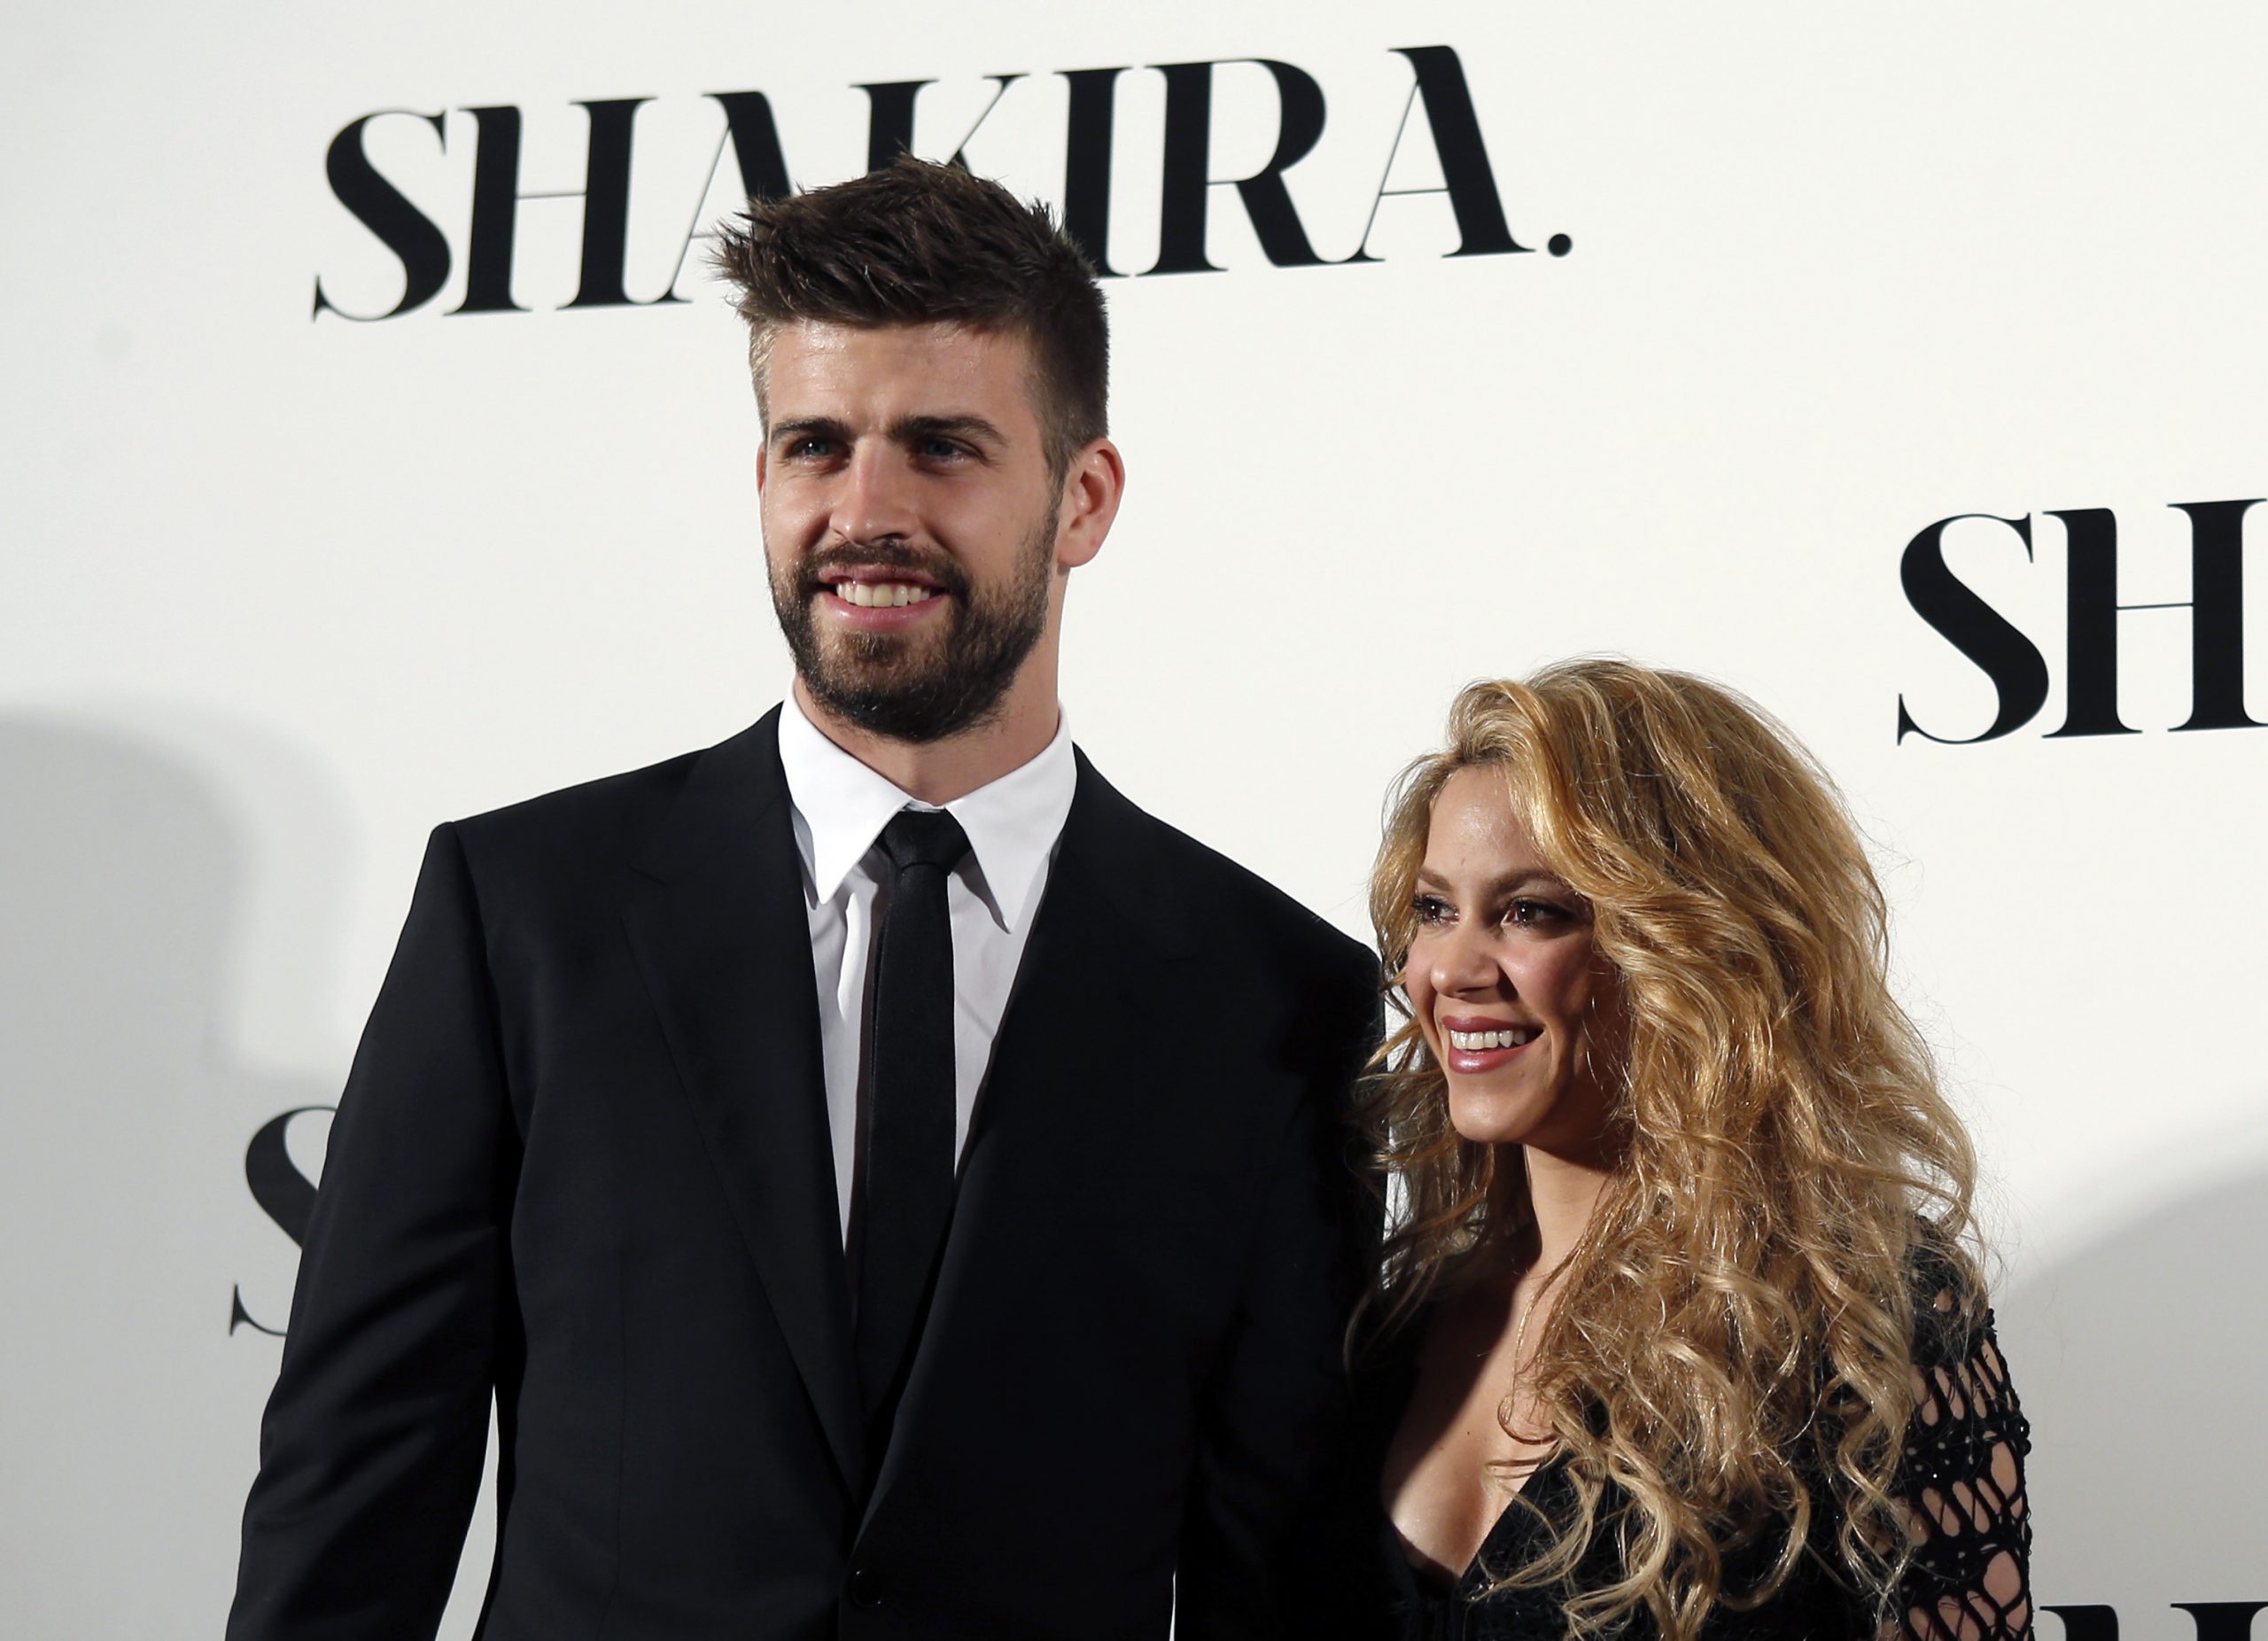 Colombian singer Shakira and FC Barcelona's soccer player Gerard Pique pose during a photocall presenting her new album 